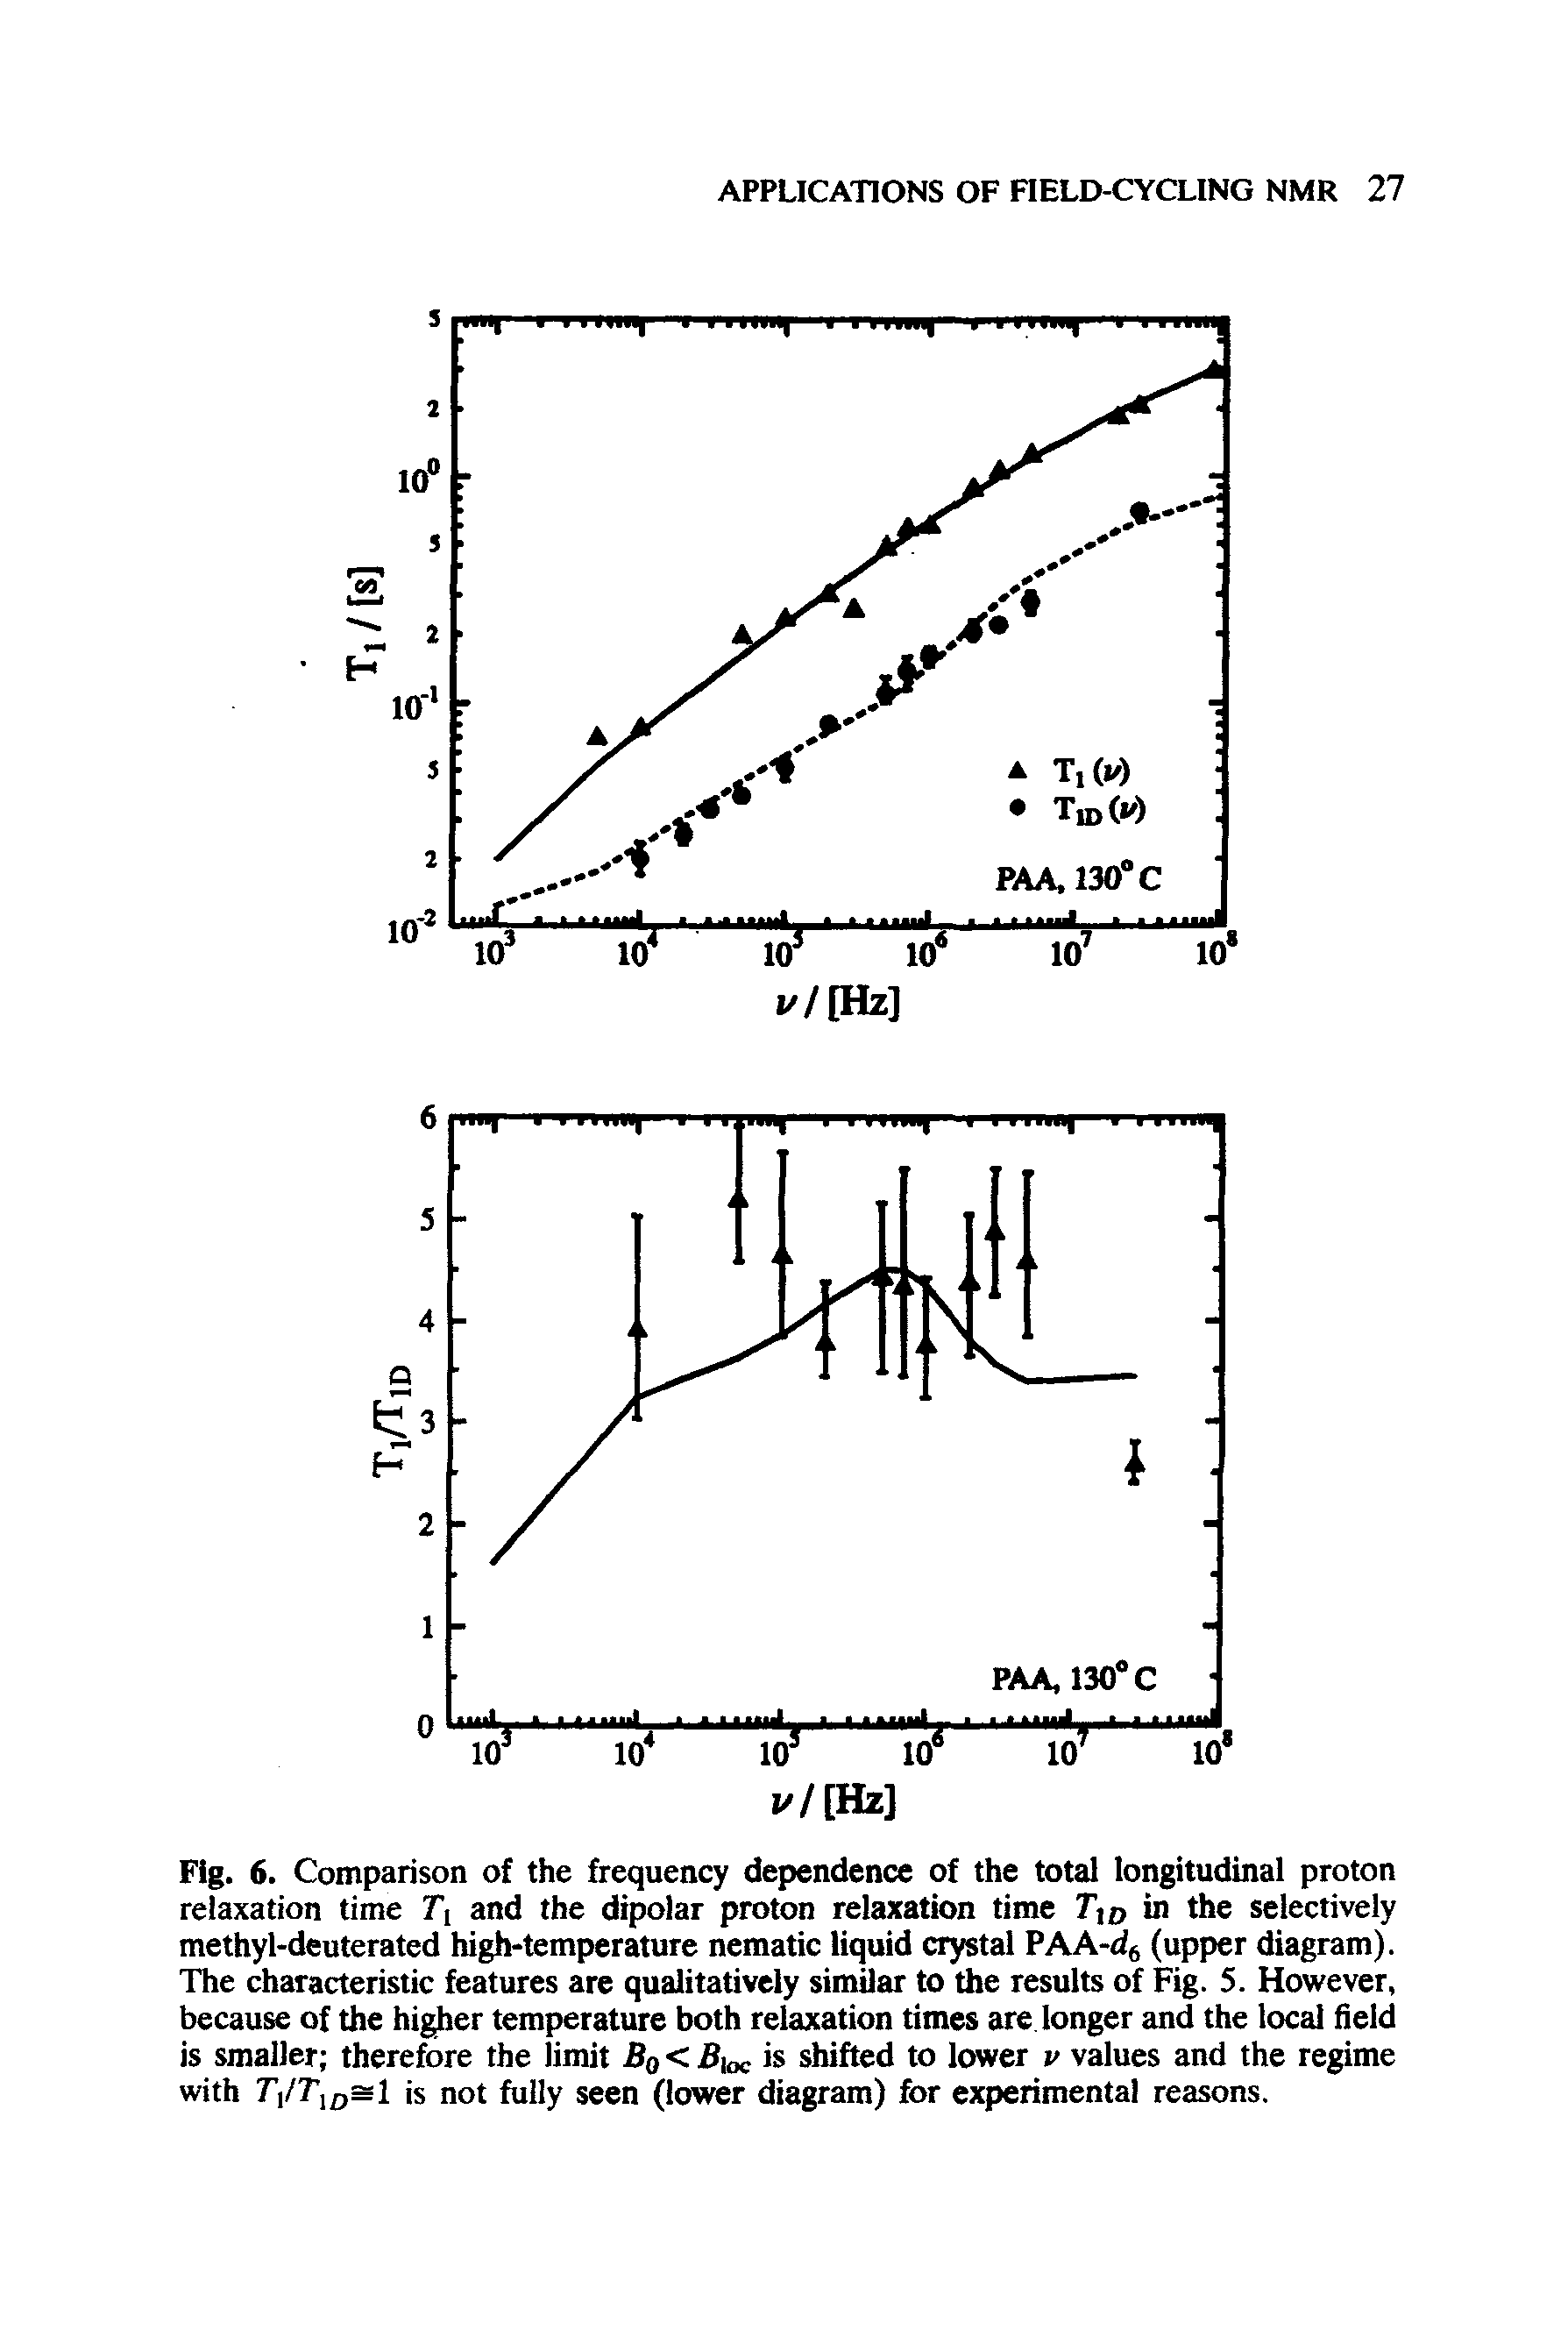 Fig. 6. Comparison of the frequency dependence of the total longitudinal proton relaxation time Ti and the dipolar proton relaxation time Tjo in the selectively methyl-deuterated high-temperature nematic liquid crystal PAA-d (upper diagram). The characteristic features are qualitatively similar to the results of Fig. S. However, because of the higher temperature both relaxation times are longer and the local field is smaller therefore the limit Bq < Bix is shifted to lower v values and the regime with T IT DS i is not fully seen (lower diagram) for experimental reasons.